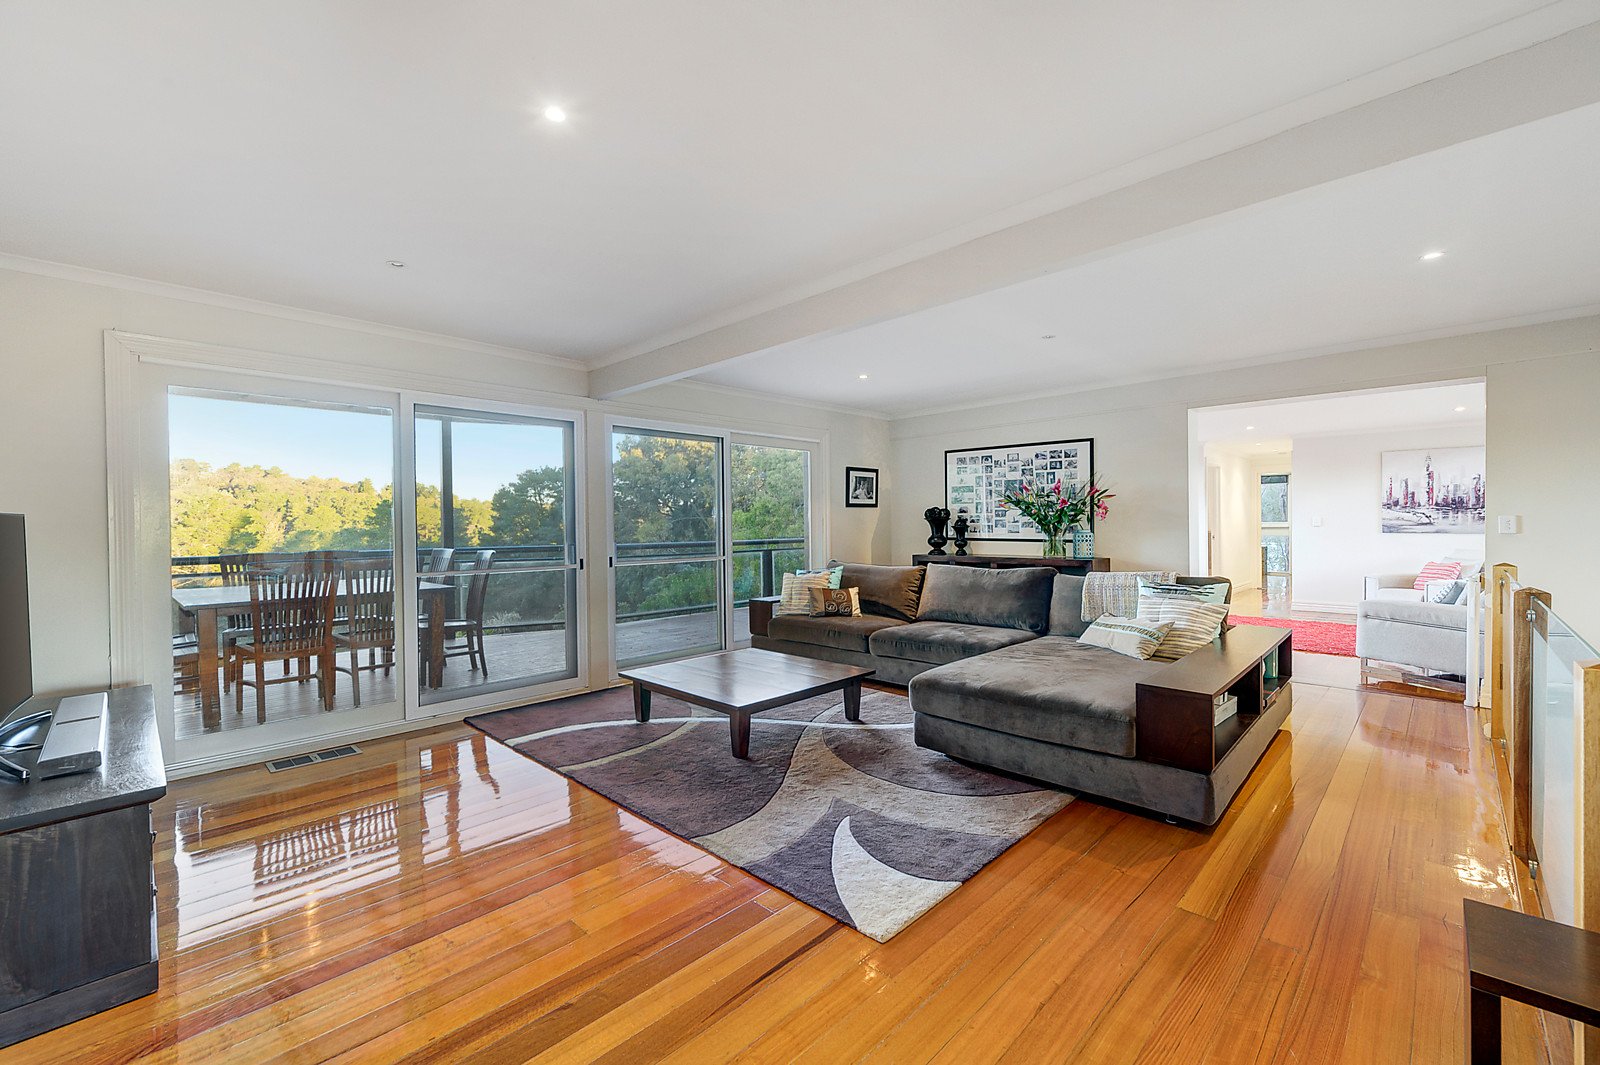 42-44 Frogmore Crescent, Park Orchards image 4